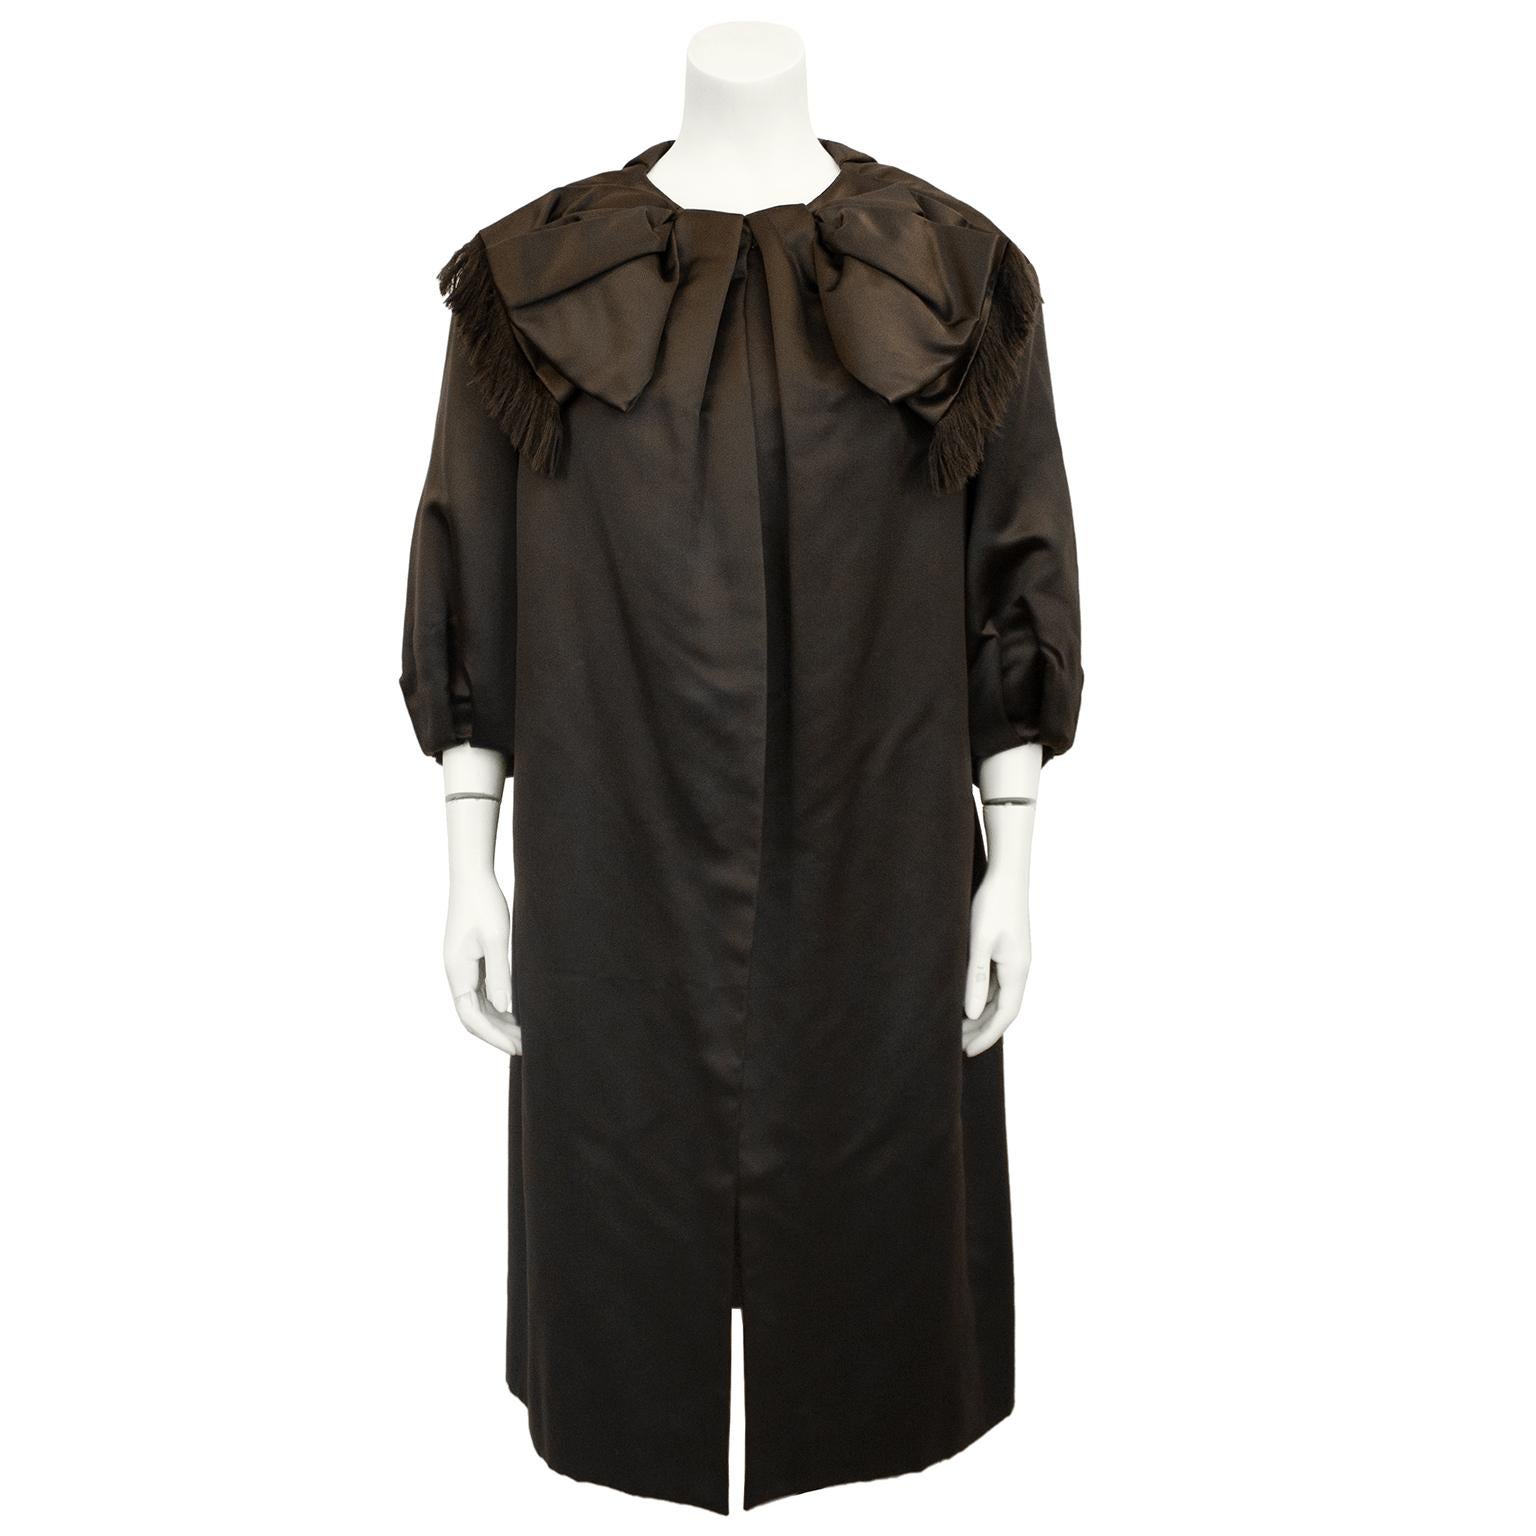 Stunning chocolate brown Dior inspired opera coat from the 1950's, from Holt Renfrew in Toronto. Oversized bow detail at neck with fringe. Opera length sleeves to wear with gloves. Single snap closure at neck. Inverted pleats at back side seams give